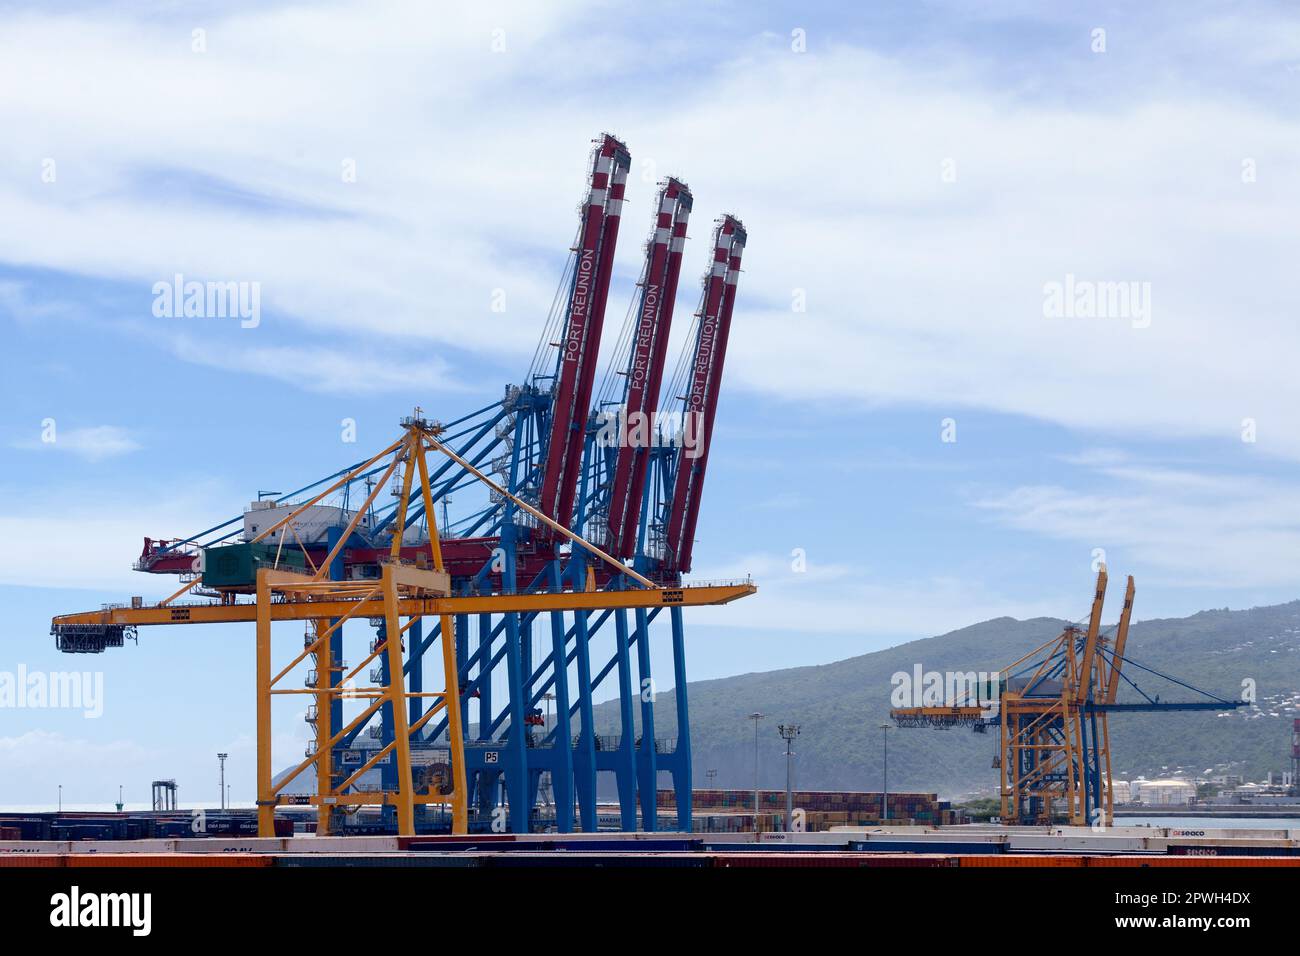 Le Port, Reunion Island - Marsh 08 2017: Port Réunion Est is the commercial dock located in the seashore city of Le Port, in Reunion Island. Stock Photo